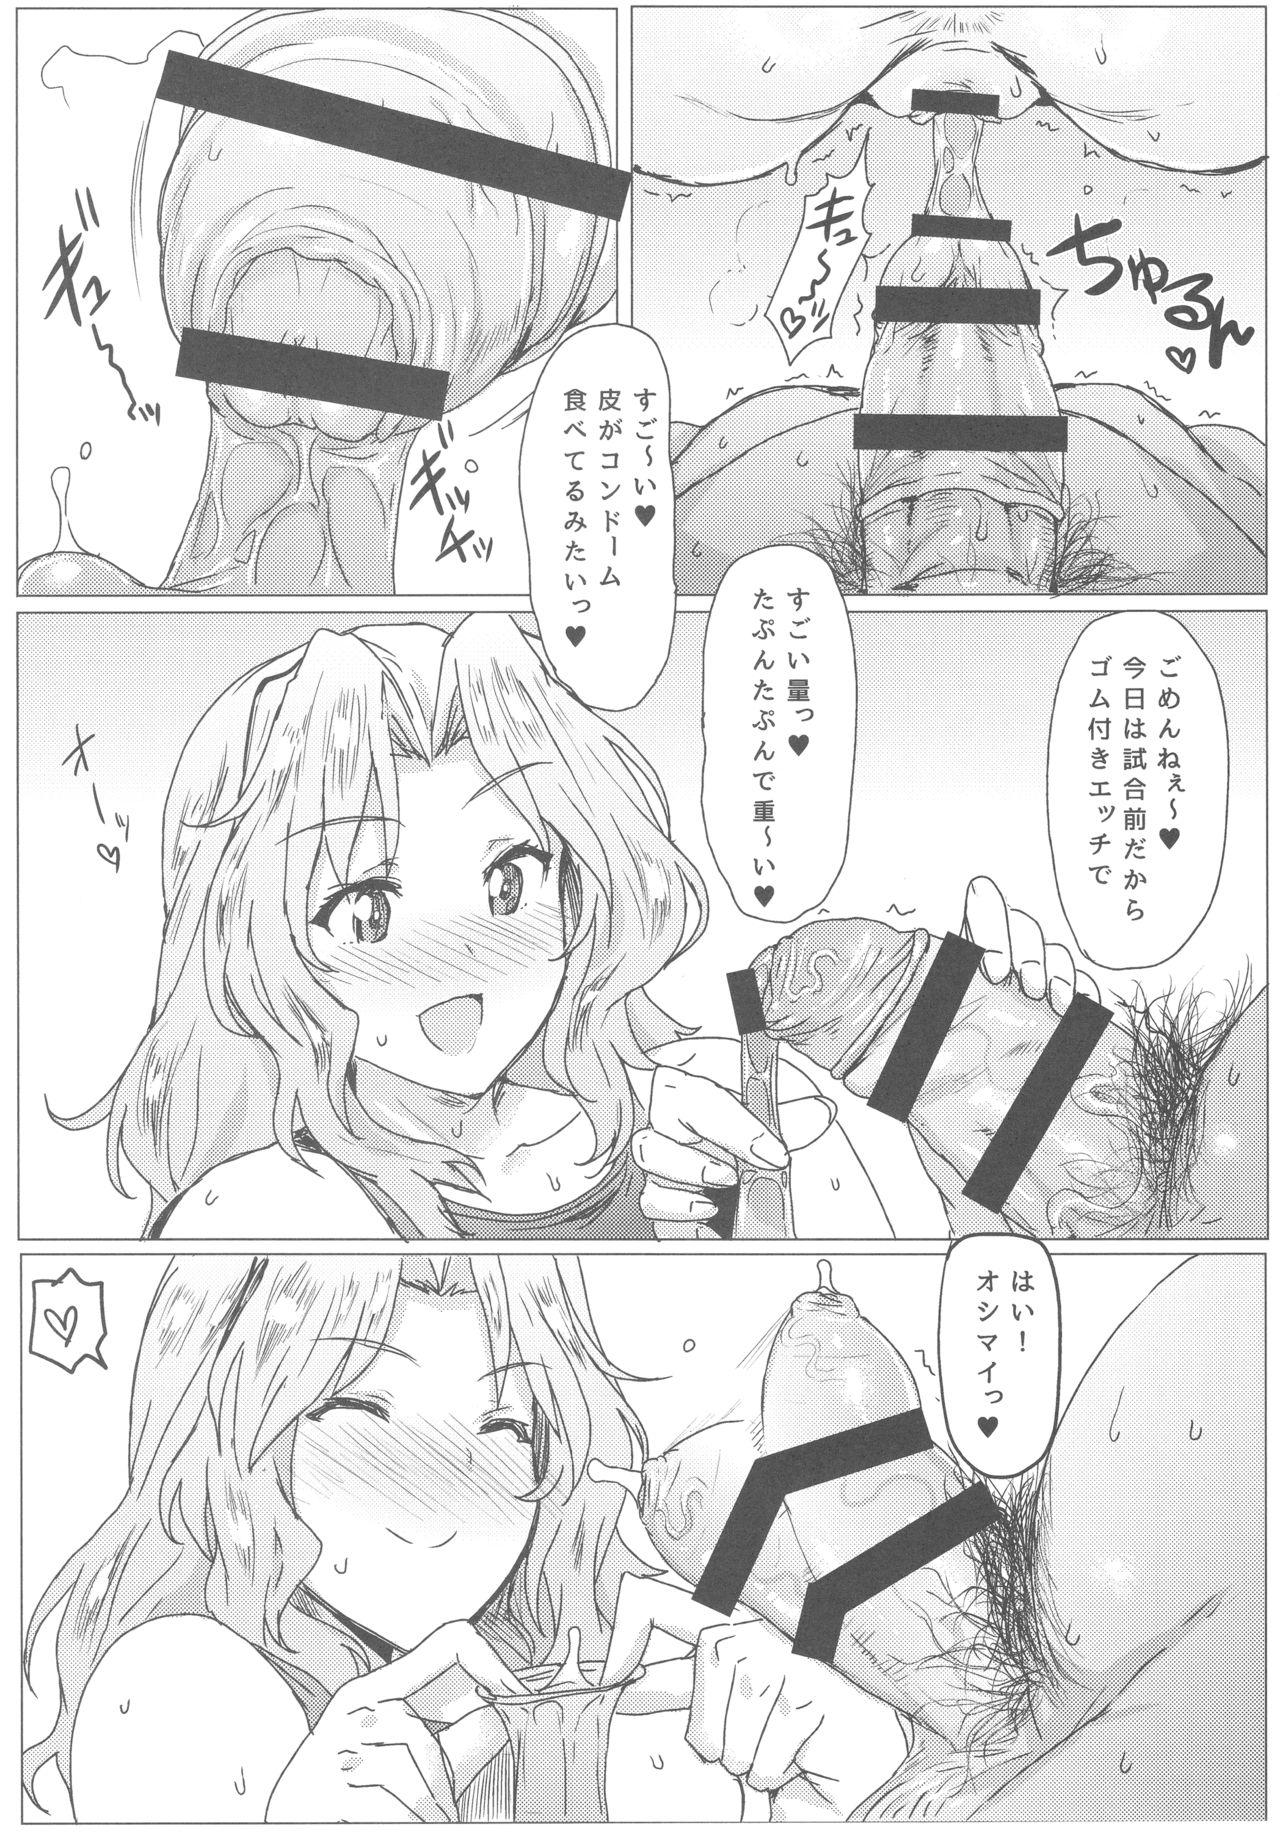 Class Room Houkei Chinpo demo Mondai NOTHING! - Girls und panzer Gay Natural - Page 7